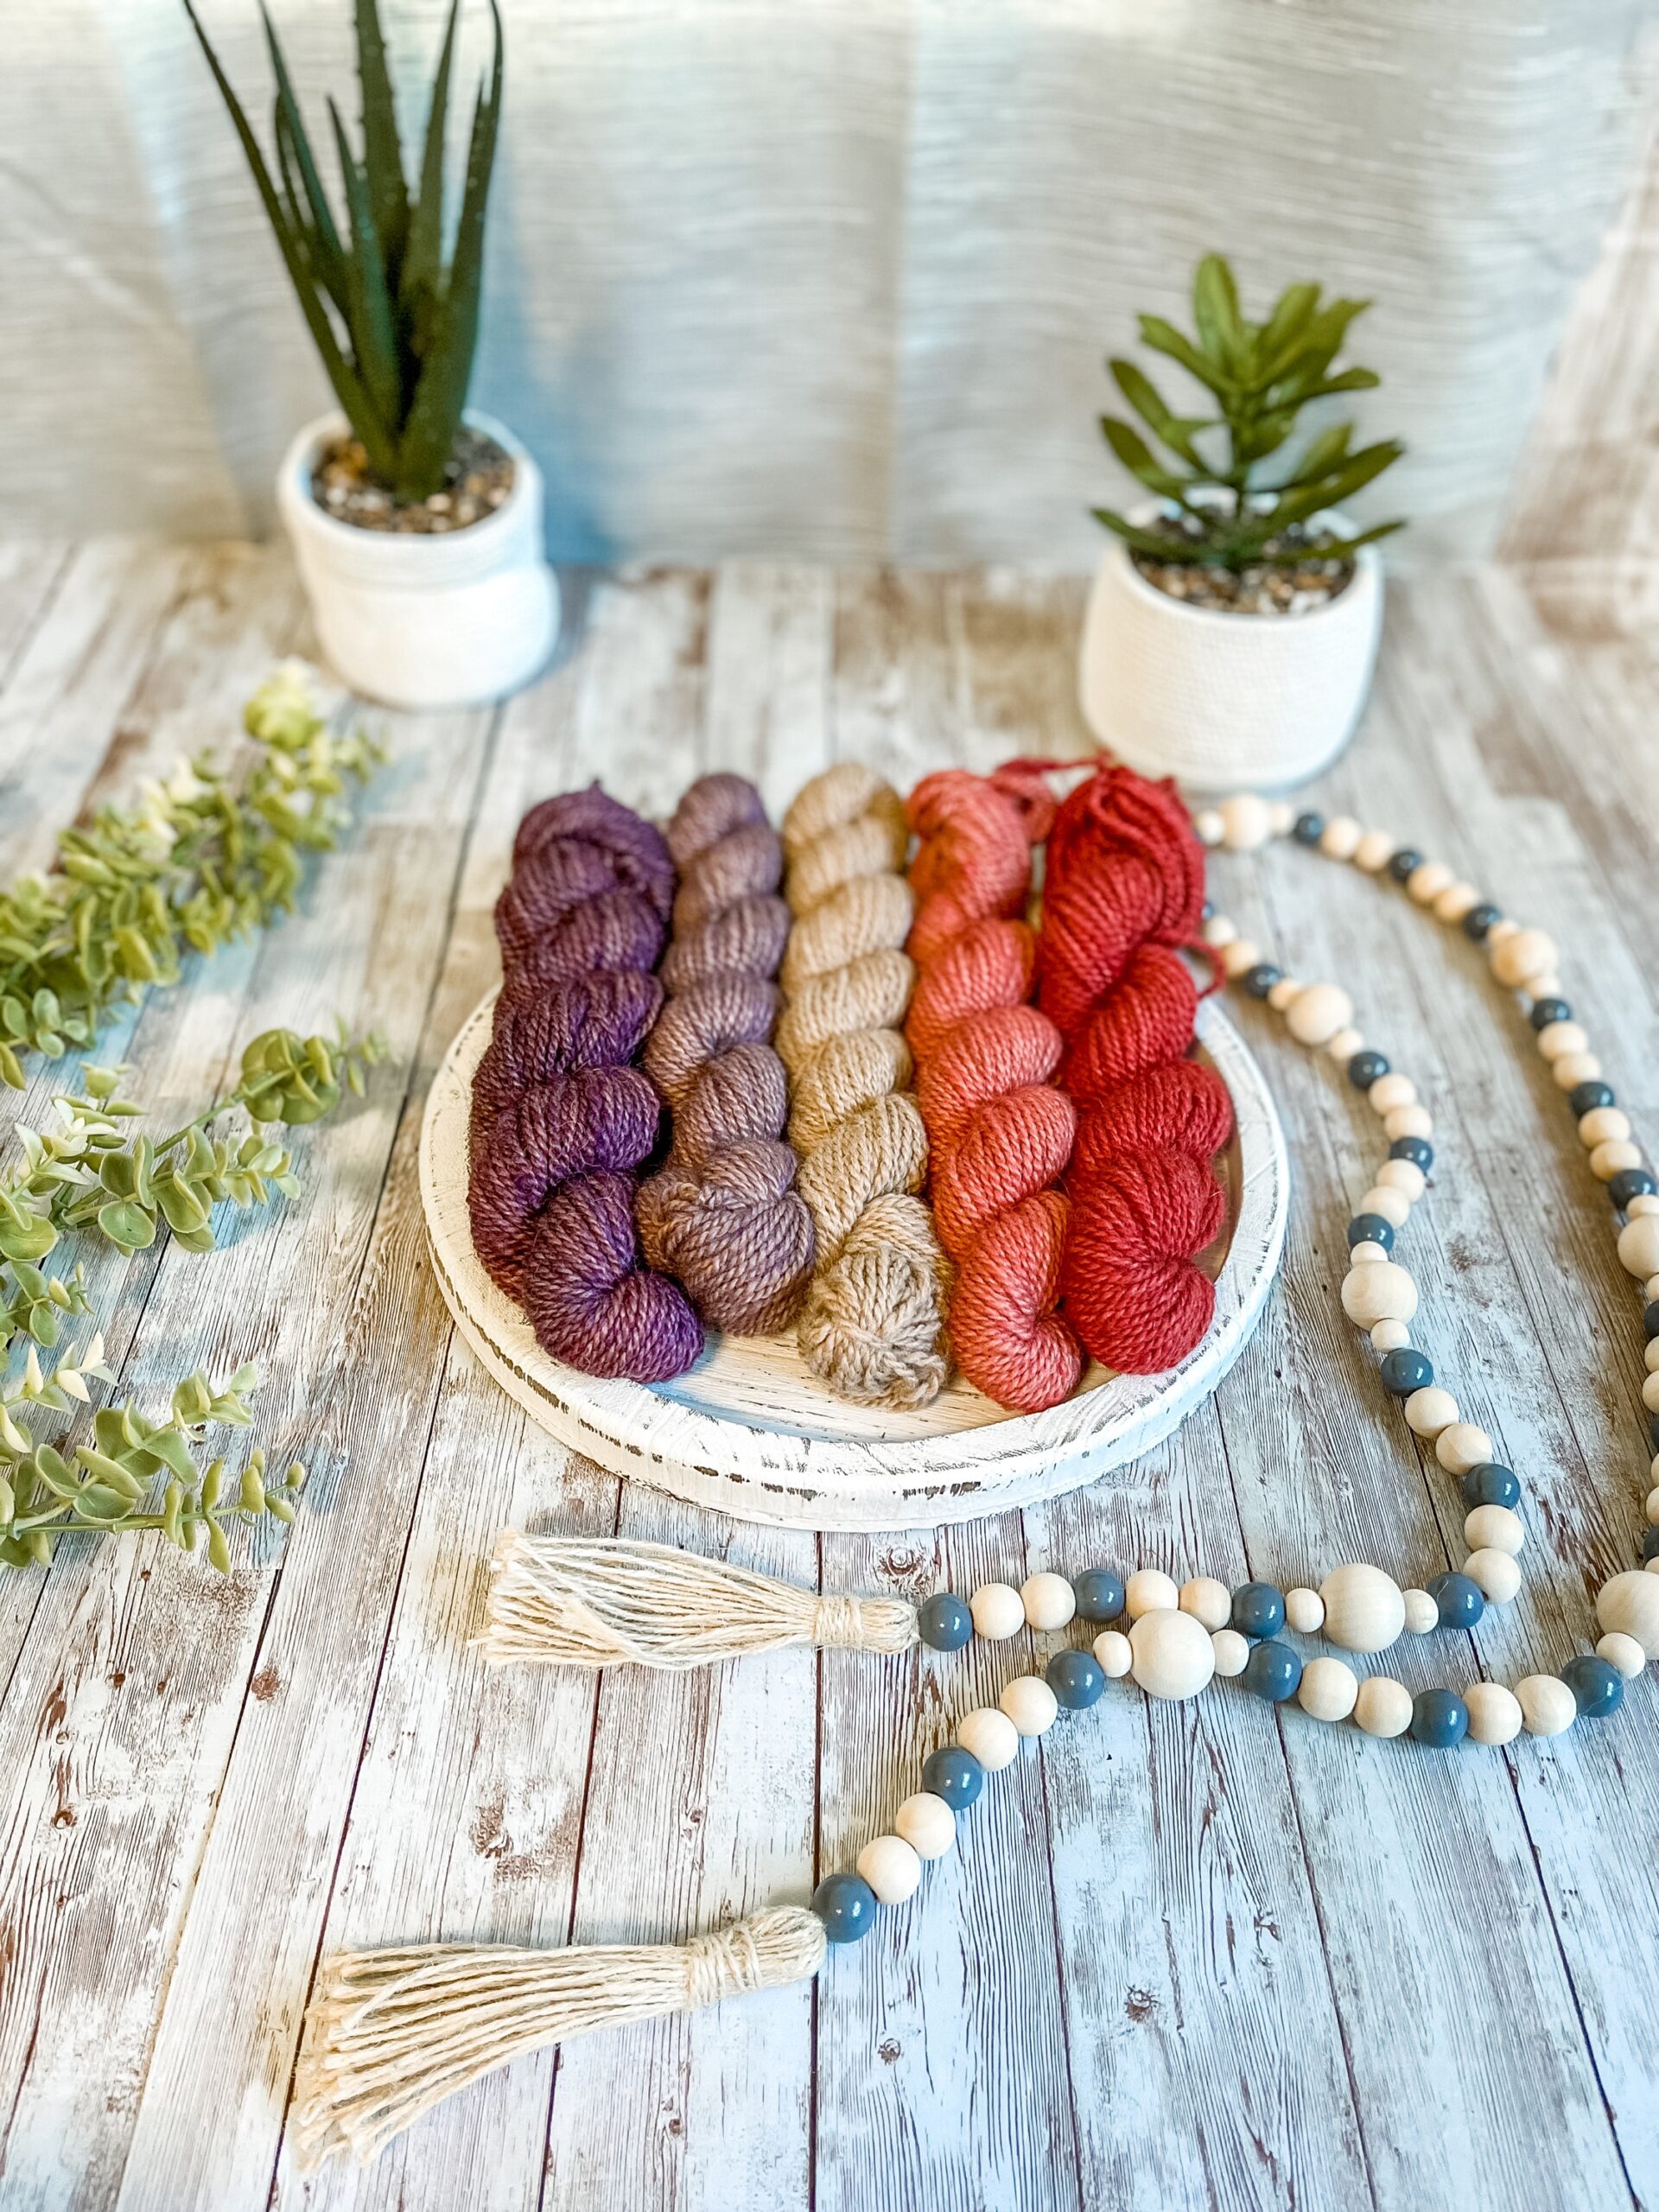 5 mini skeins of alpaca rest on a white wood trivet. They range in color from a dark purple, light purple, natural undyed fawn, light red, and dark red. They are surrounded by beads to the right, greenery to the left and 2 succulent plants in the background.